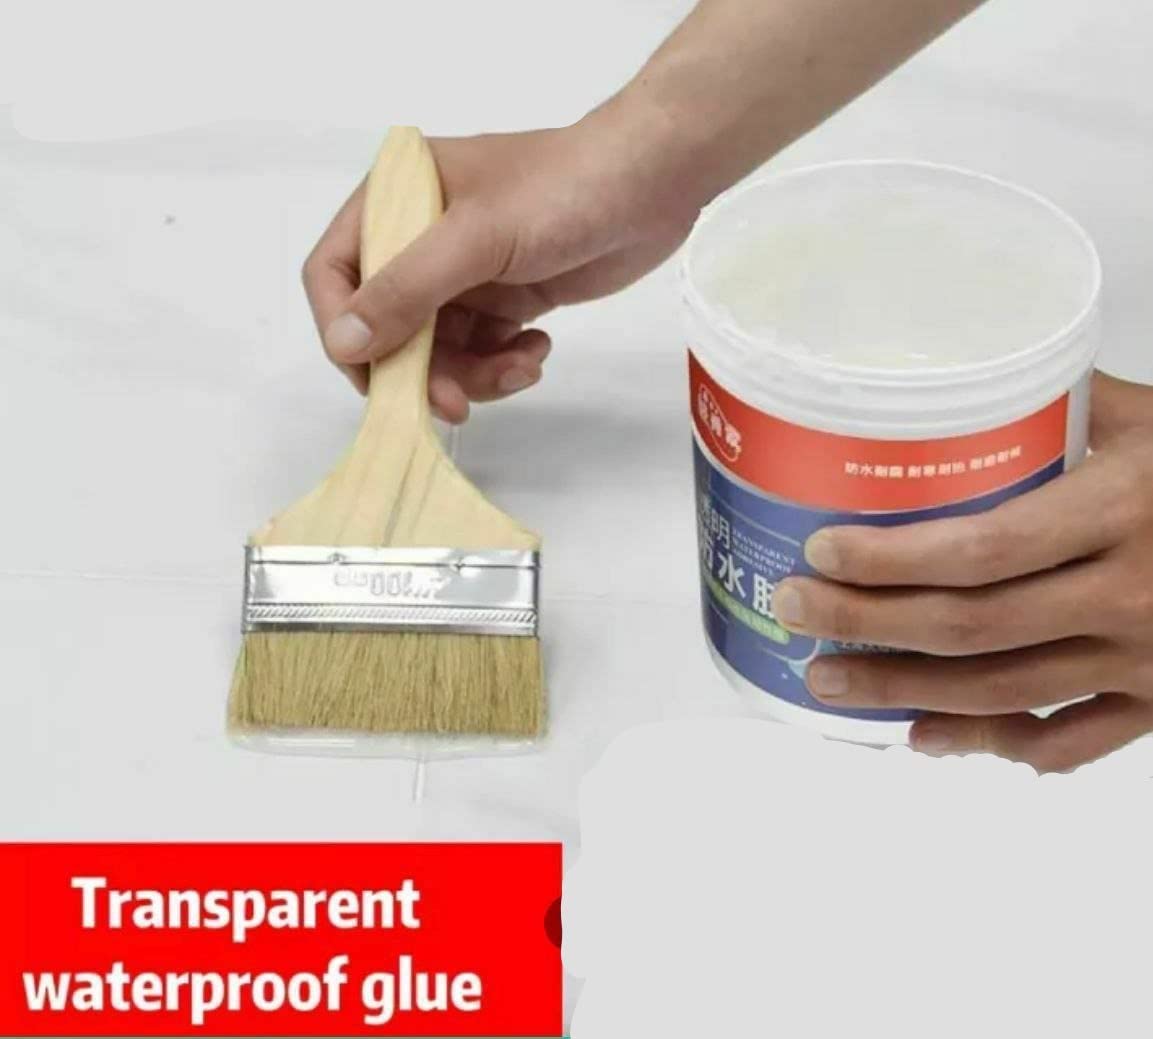 Waterproof Transparent Crack Seal Glue 300g with Brush | Leaking Sealant for Windows, Roofs, and More | Transparent Sealant Gel Adhesive for Surface, Cement, Marble, Wood